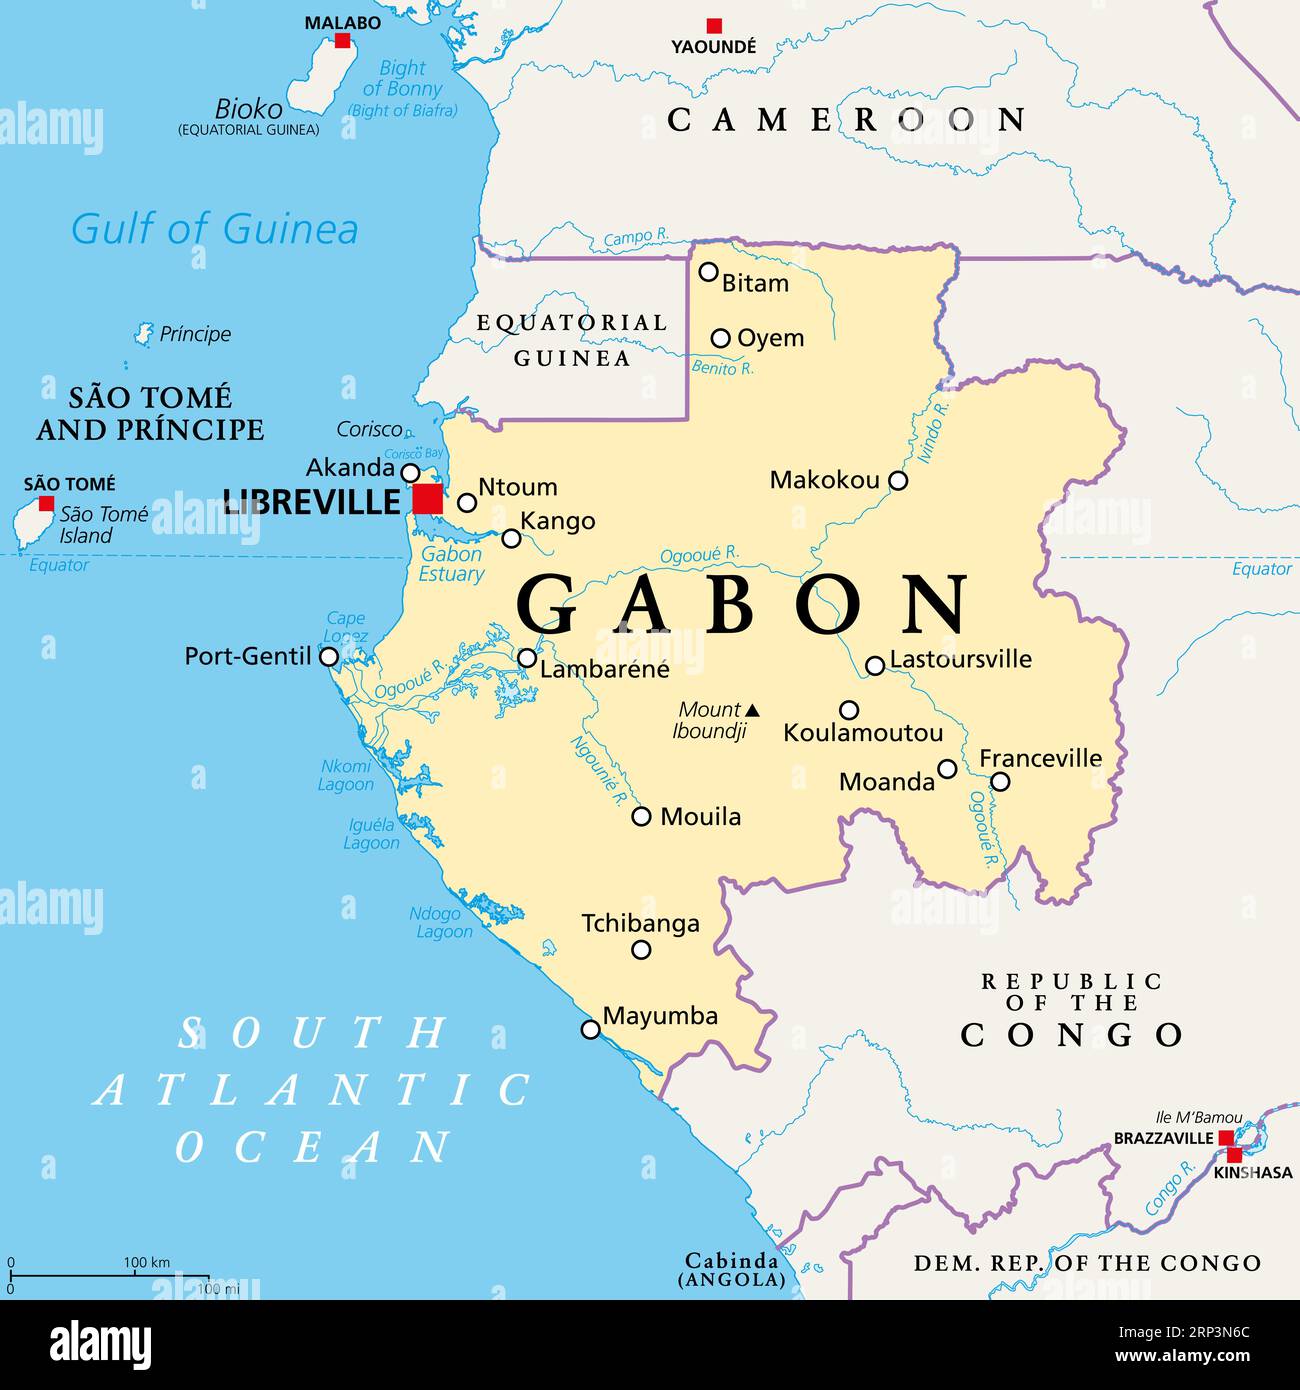 Gabon, political map. Gabonese Republic, a country on the Atlantic coast of Central Africa, with capital Libreville. Stock Photo